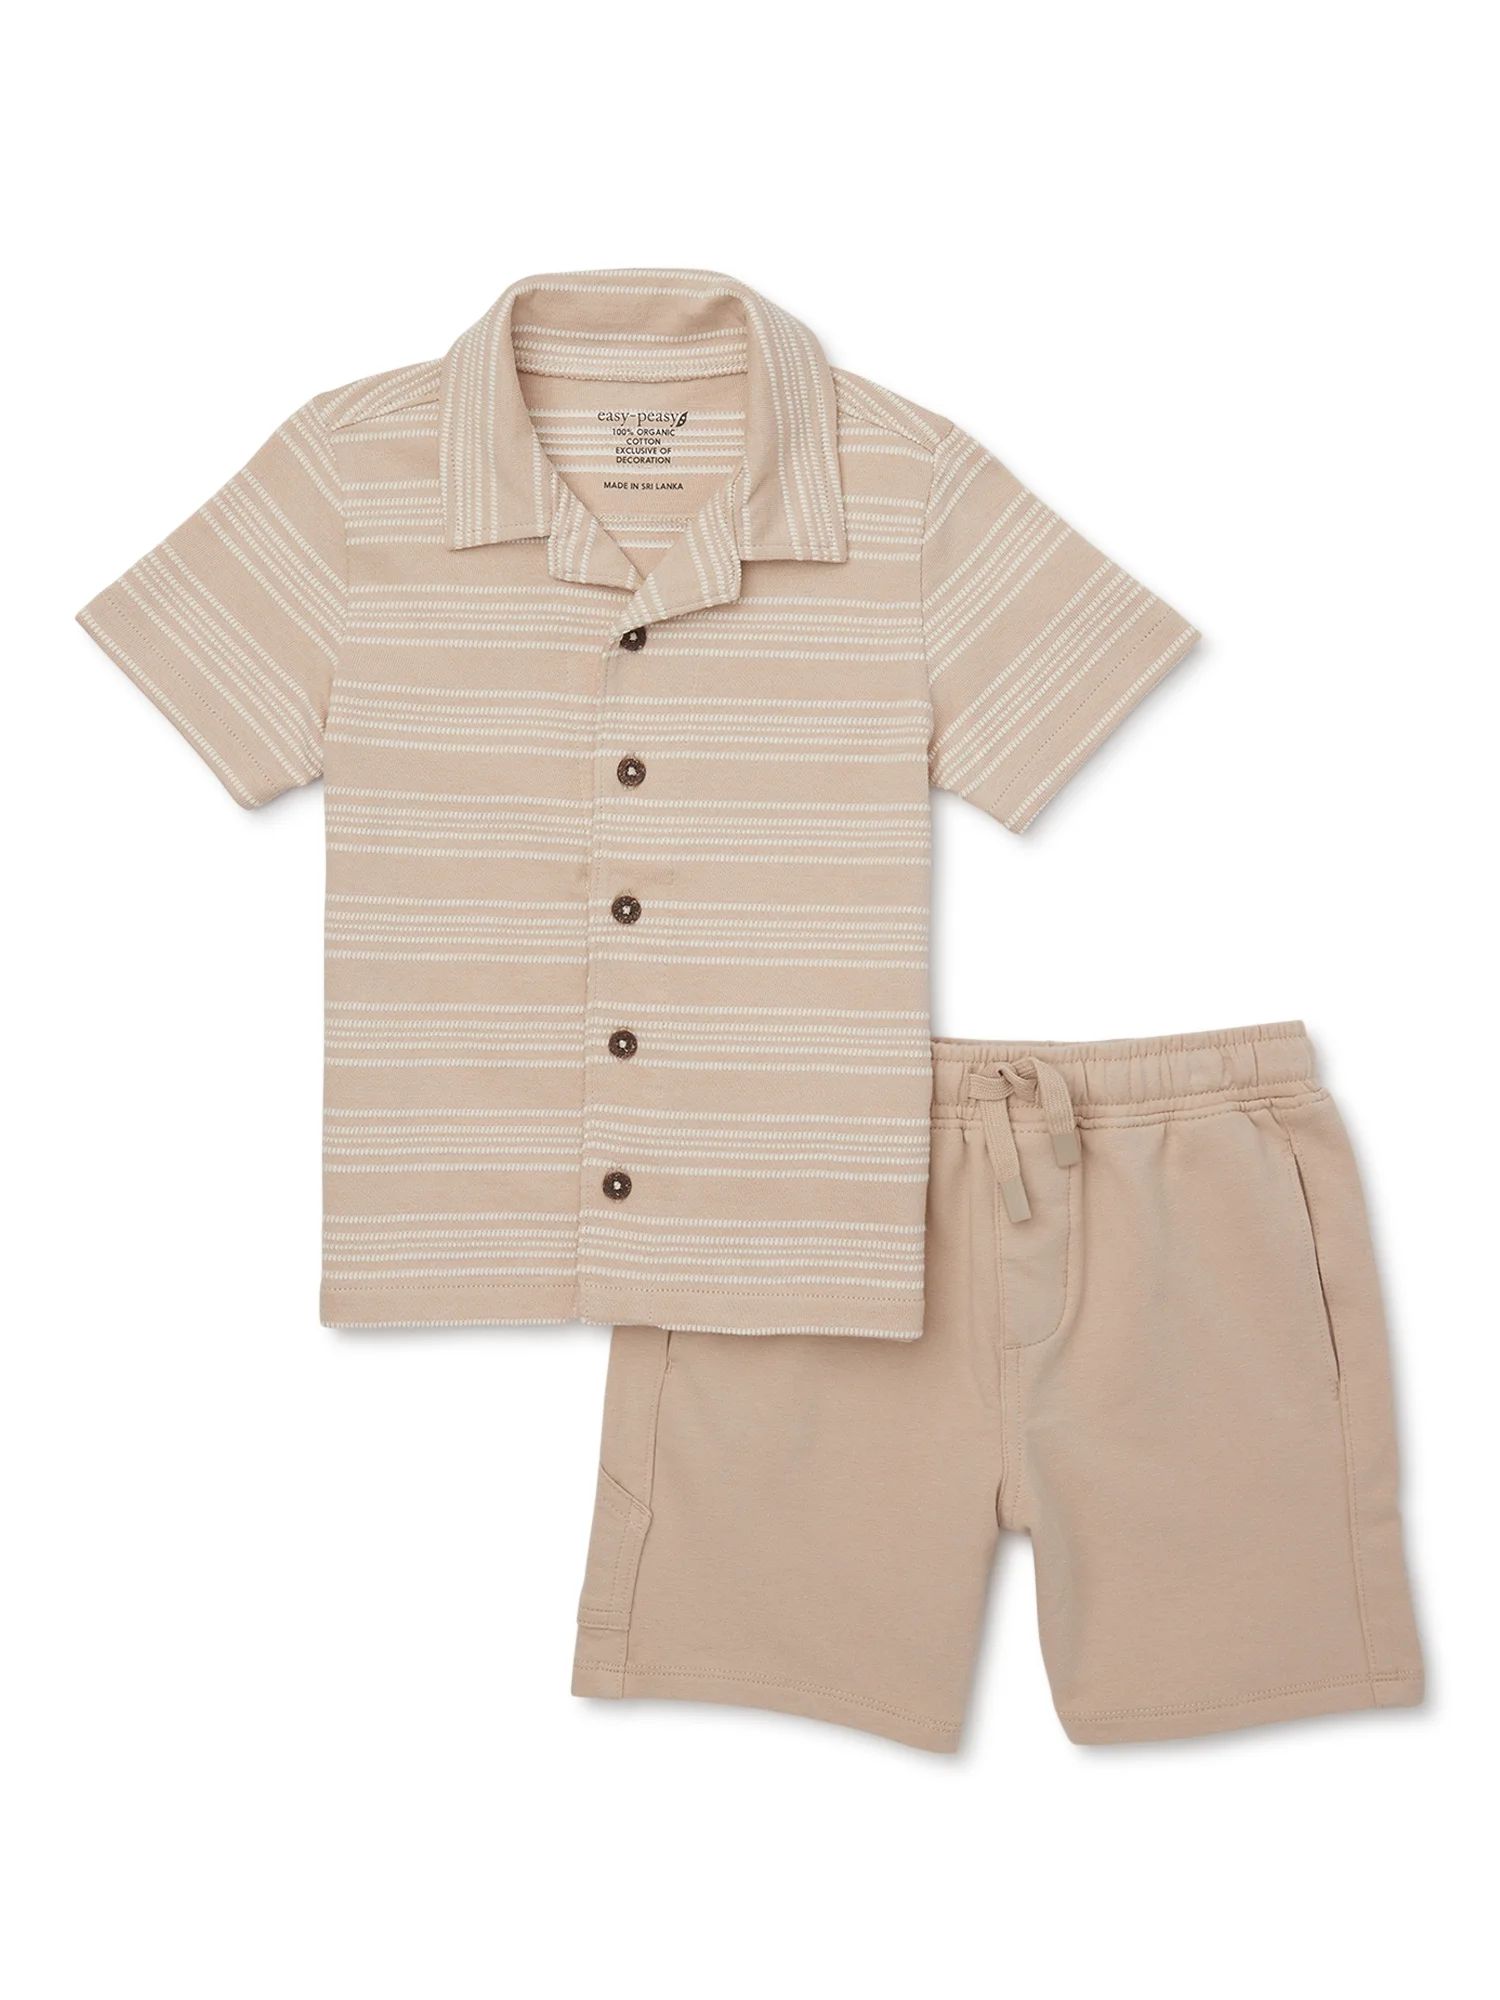 easy-peasy Toddler Boy Button Up Shirt and Short Outfit Set, 2-Piece, Sizes 18M-5T | Walmart (US)